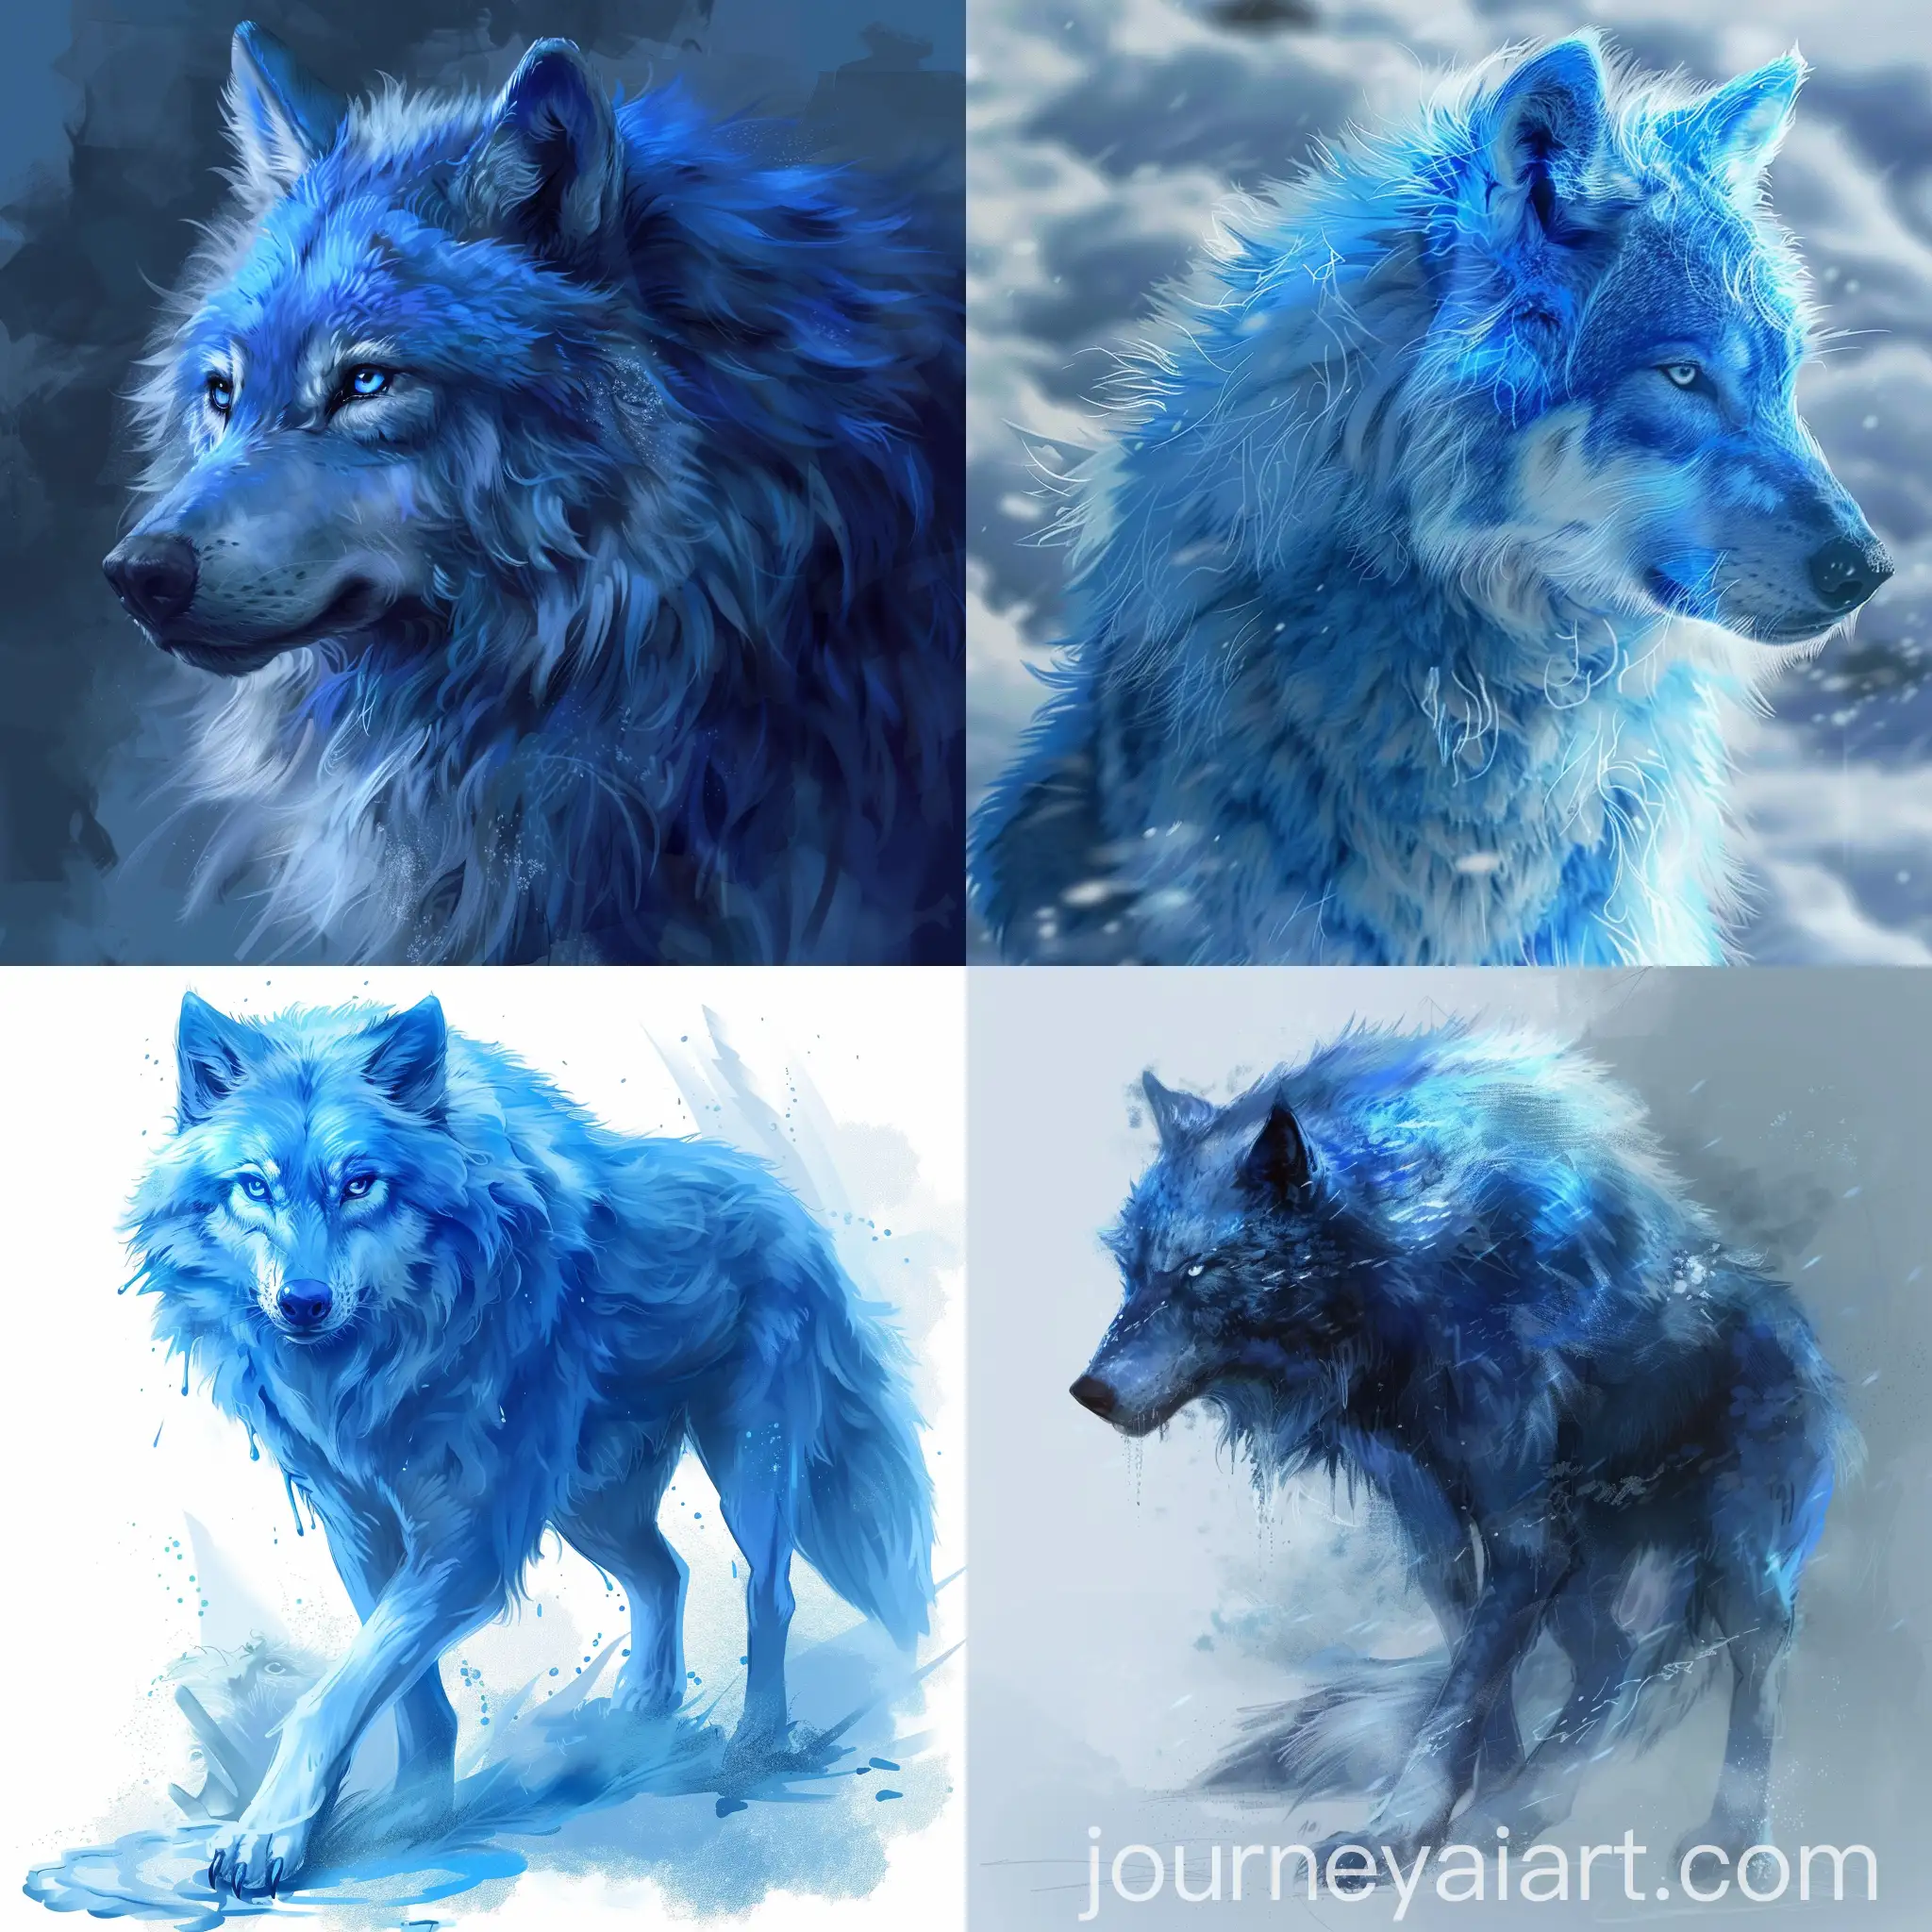 Majestic-Blue-Wolf-with-Oceanic-Fur